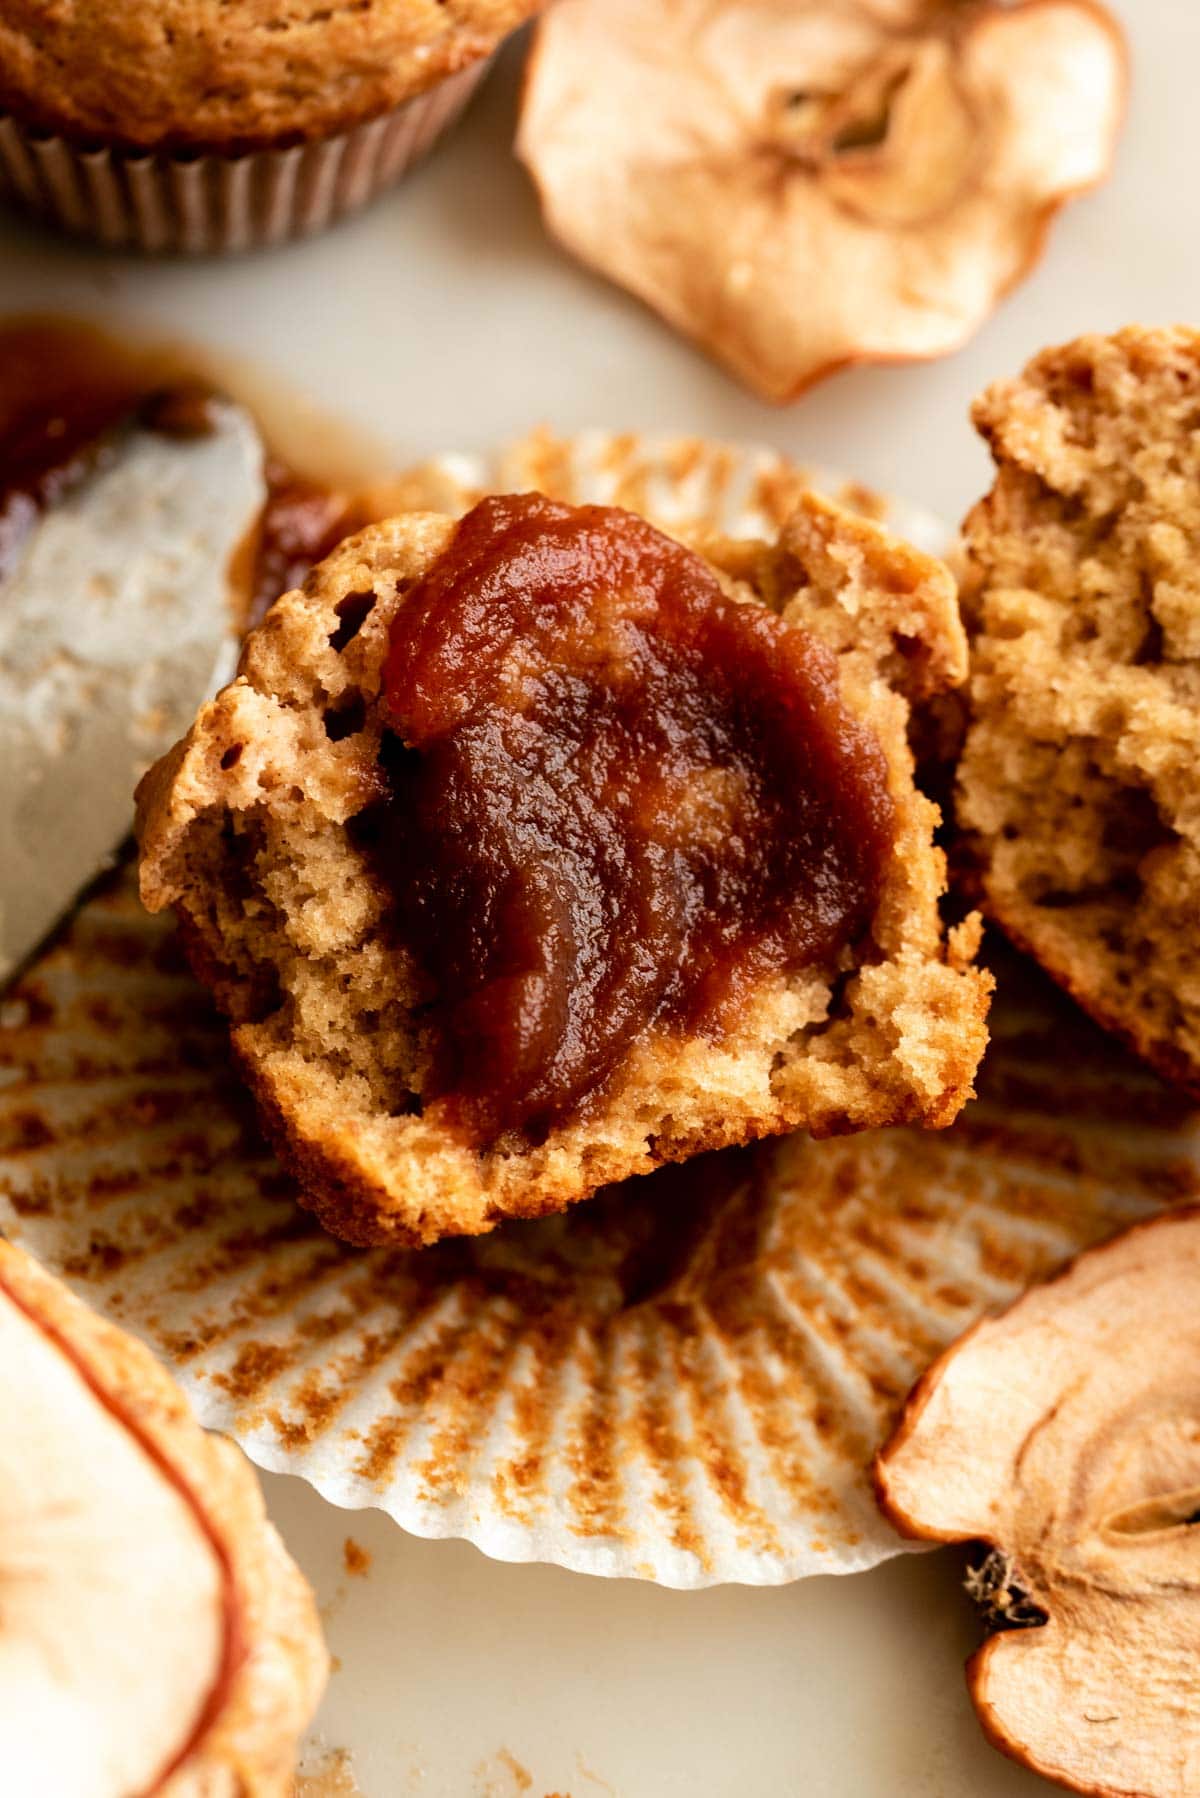 Apple butter muffin split in half and smeared with apple butter.